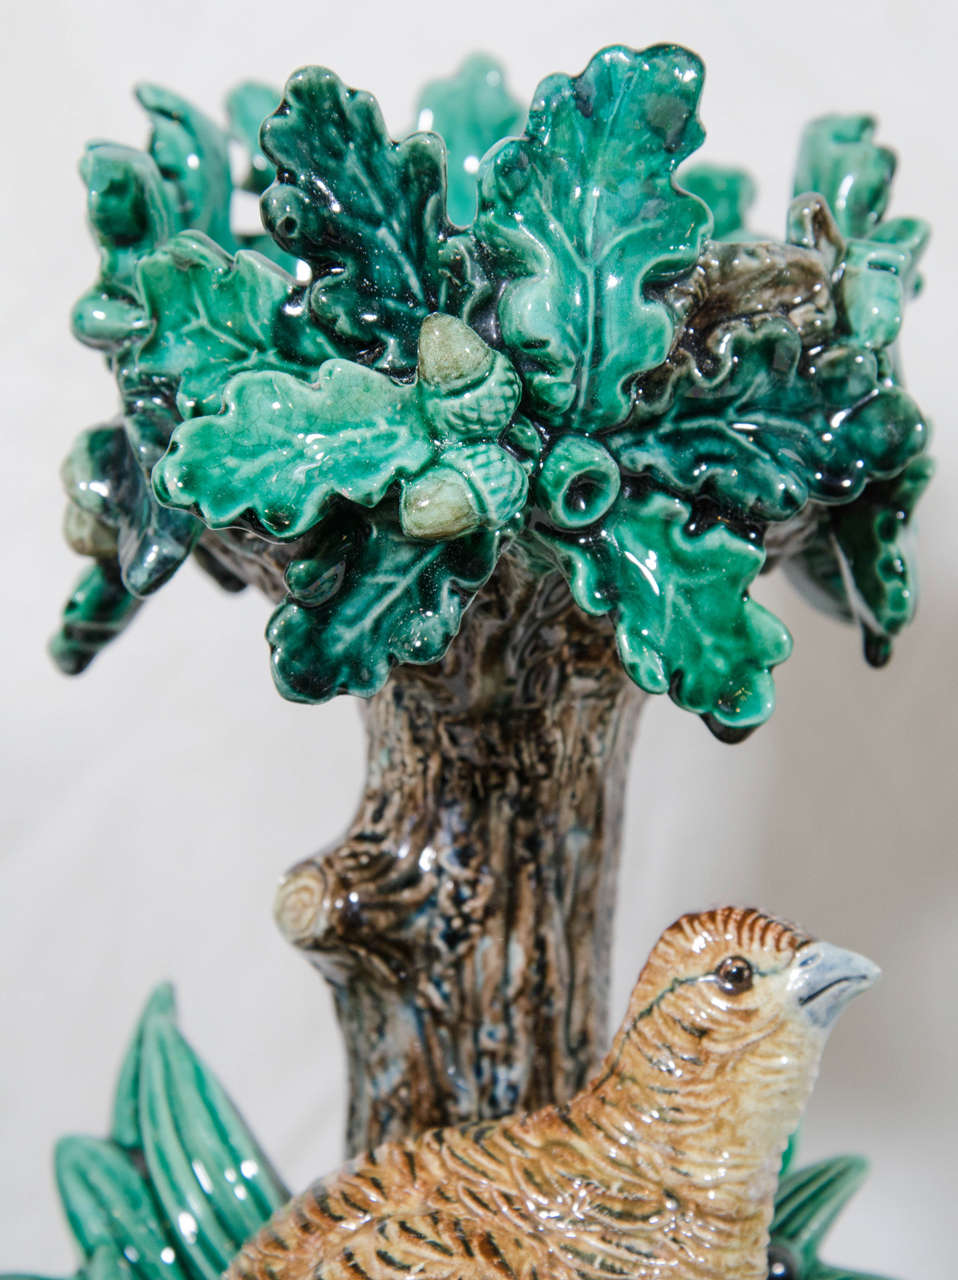 Victorian Two-Piece Majolica Centerpiece with a Partridge and Chicks